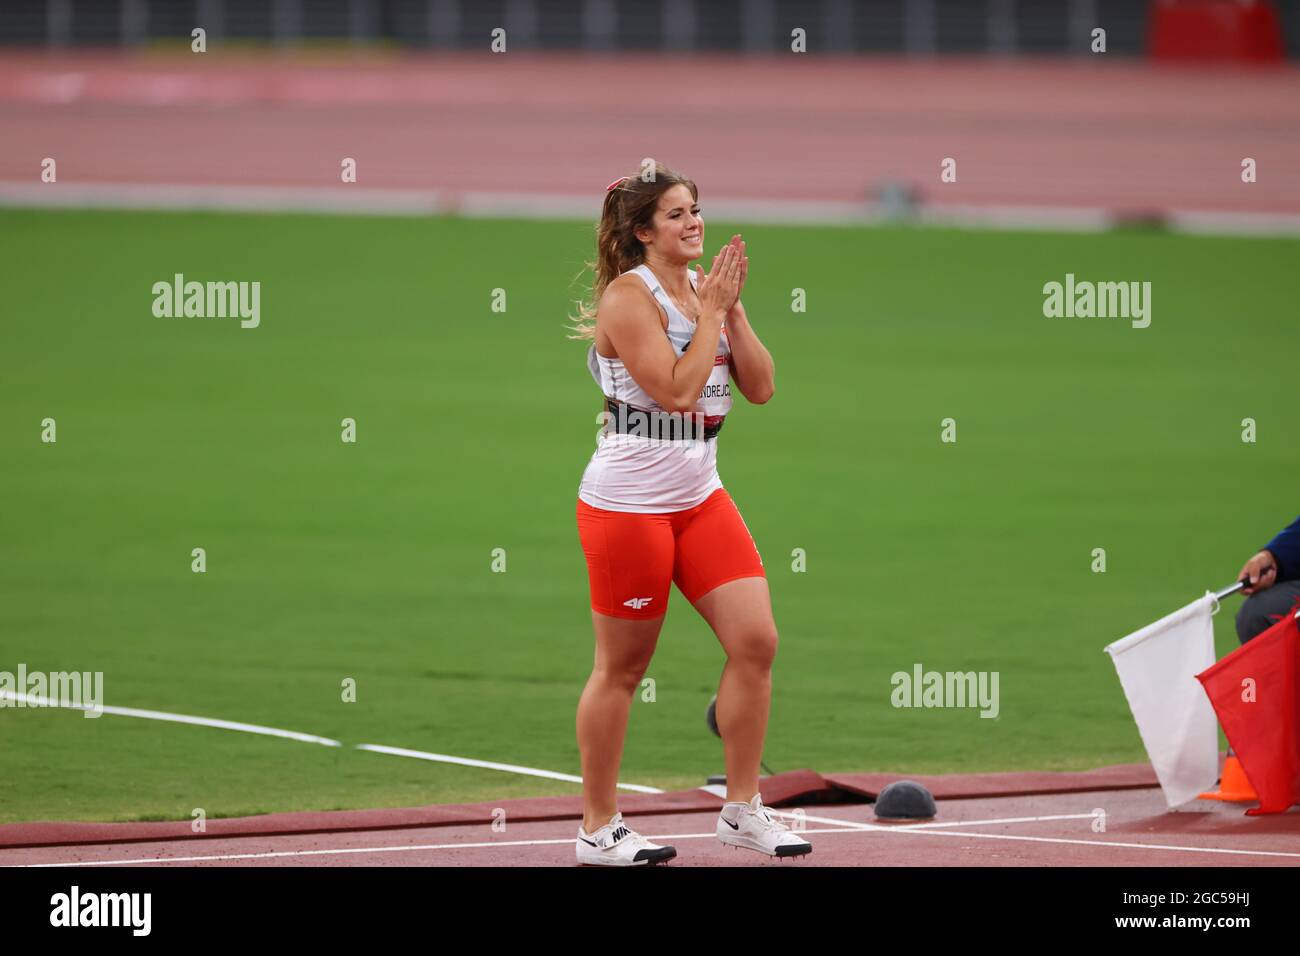 Tokyo, Japan. 6th Aug, 2021. Maria ANDREJCZYK (POL) celebrates her silver medal Athletics : Women's Javelin Throw Final during the Tokyo 2020 Olympic Games at the National Stadium in Tokyo, Japan . Credit: YUTAKA/AFLO SPORT/Alamy Live News Stock Photo